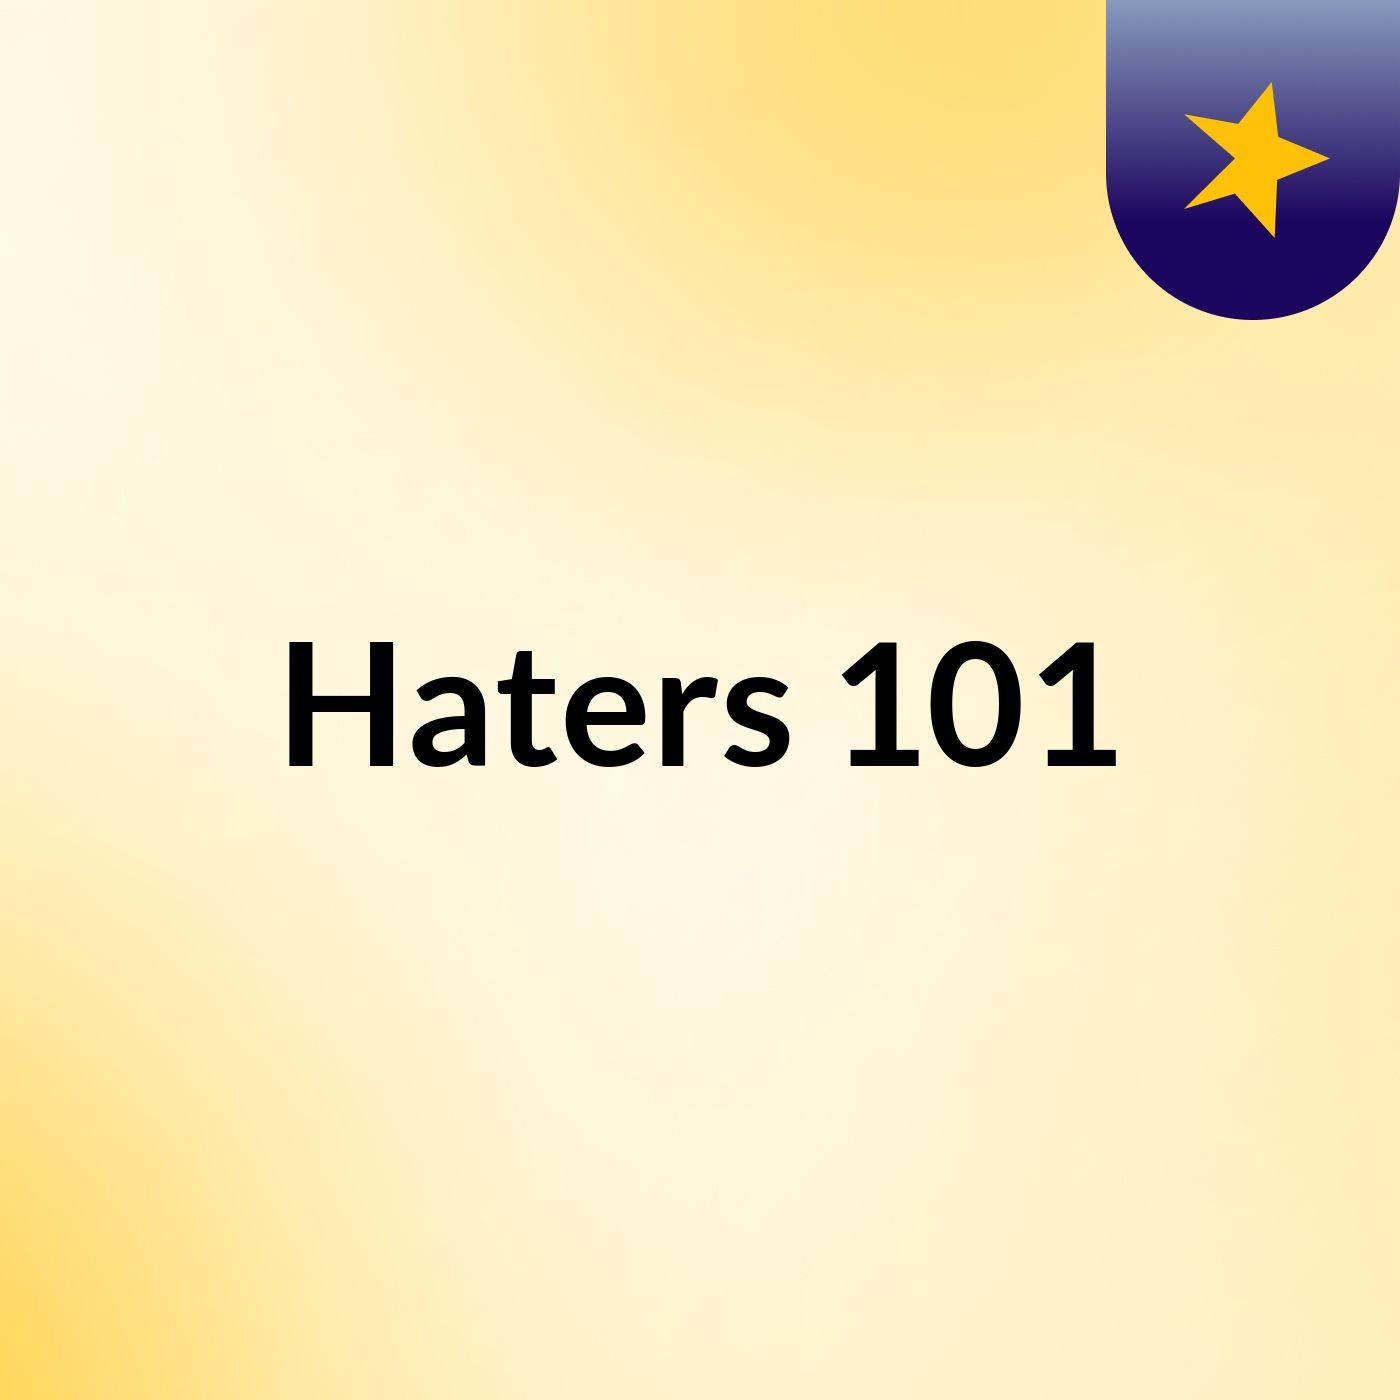 Episode 3 - Haters 101